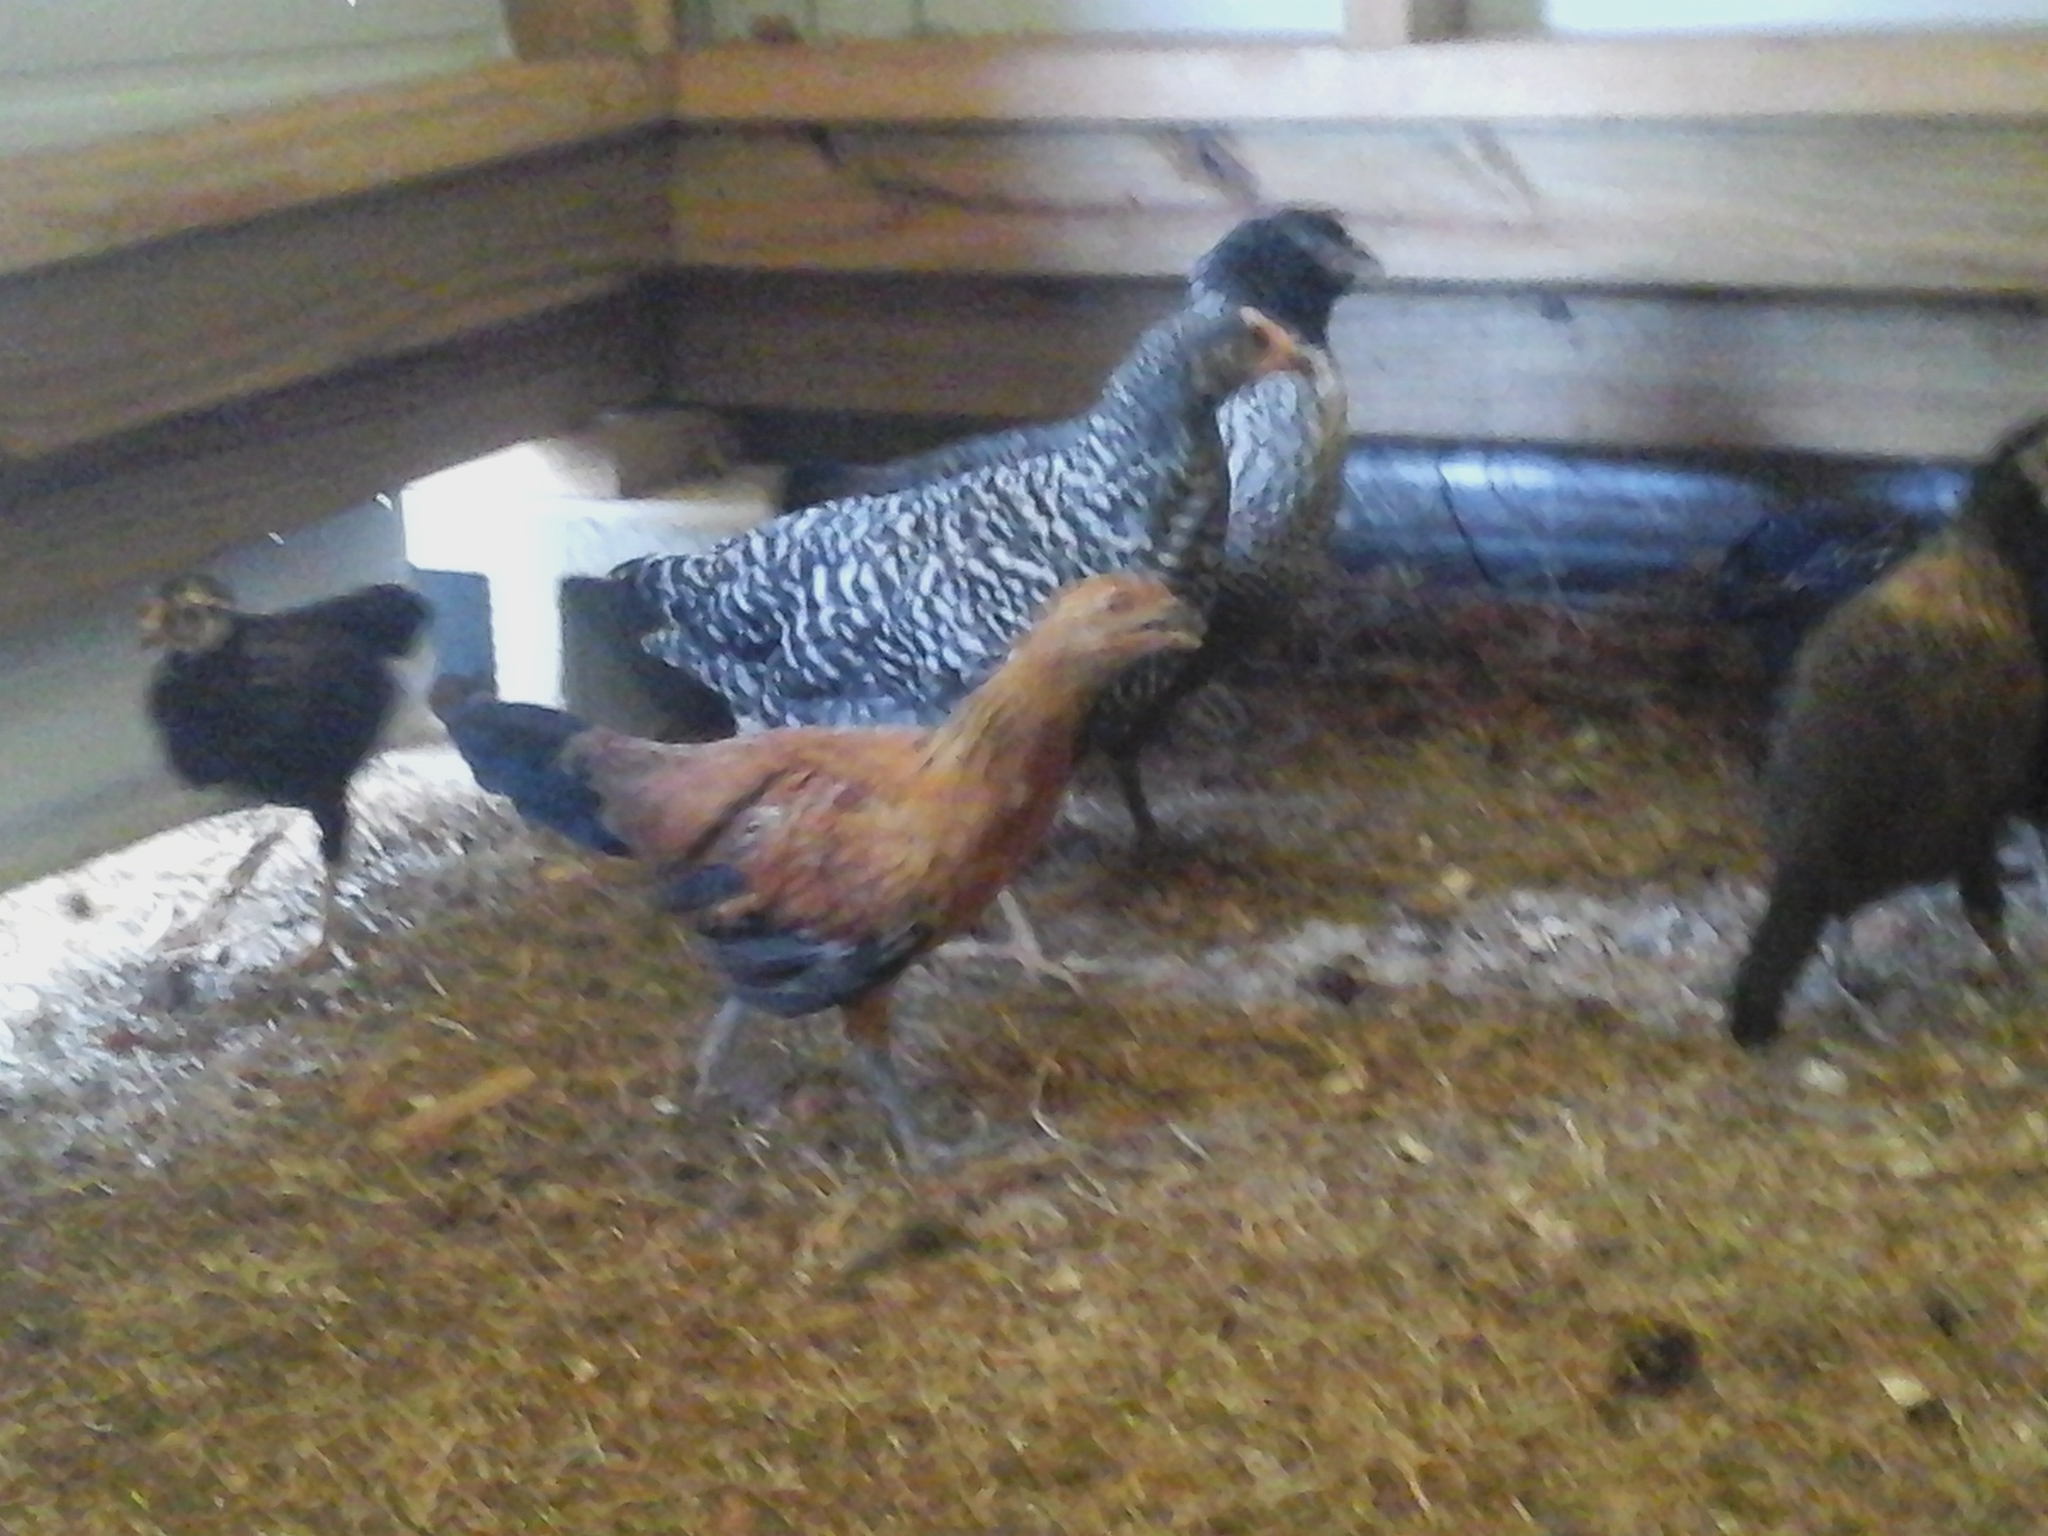 My young chickens